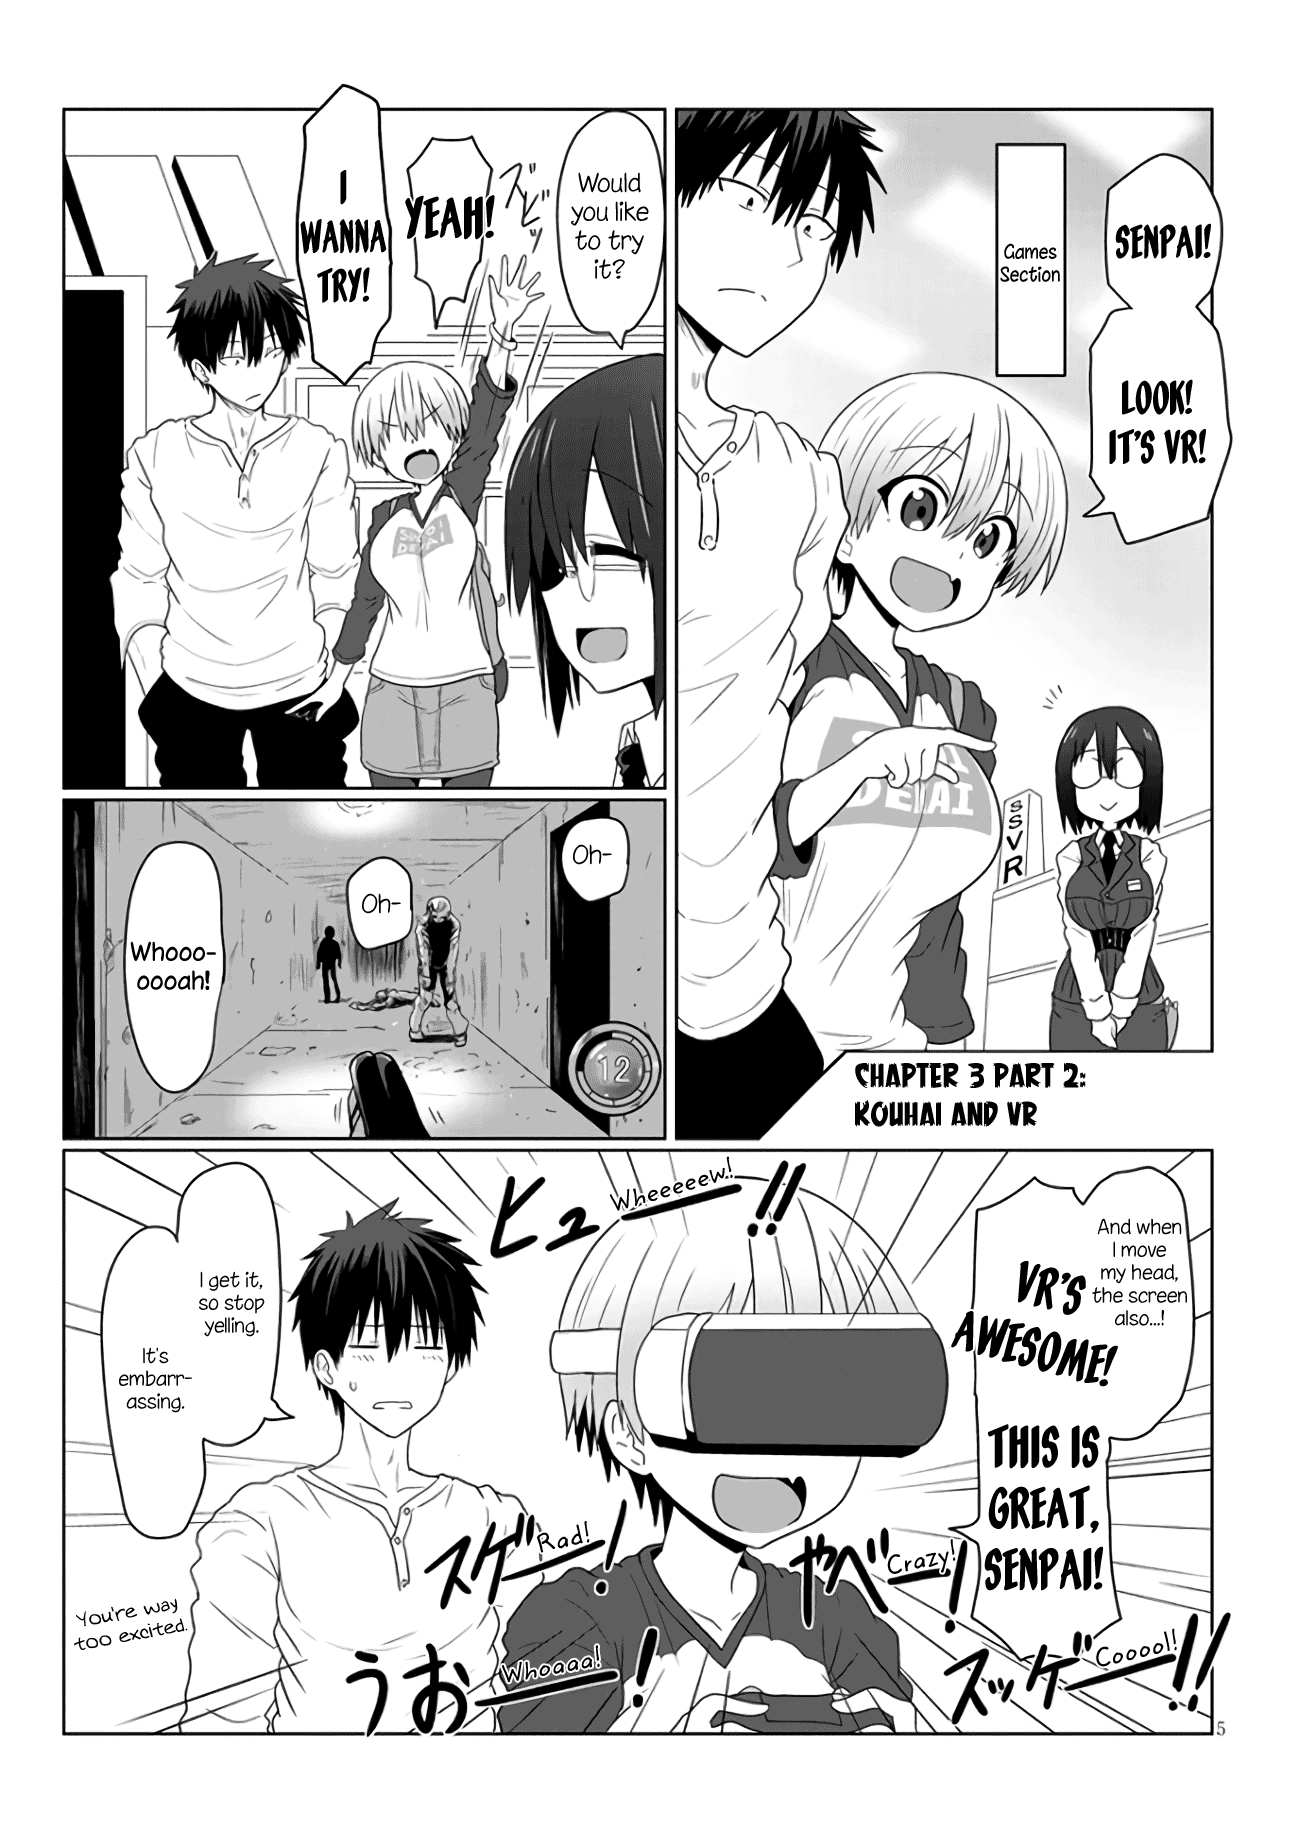 Uzaki chan Wants to Hang Out! Ch. 3.2 Kouhai and VR